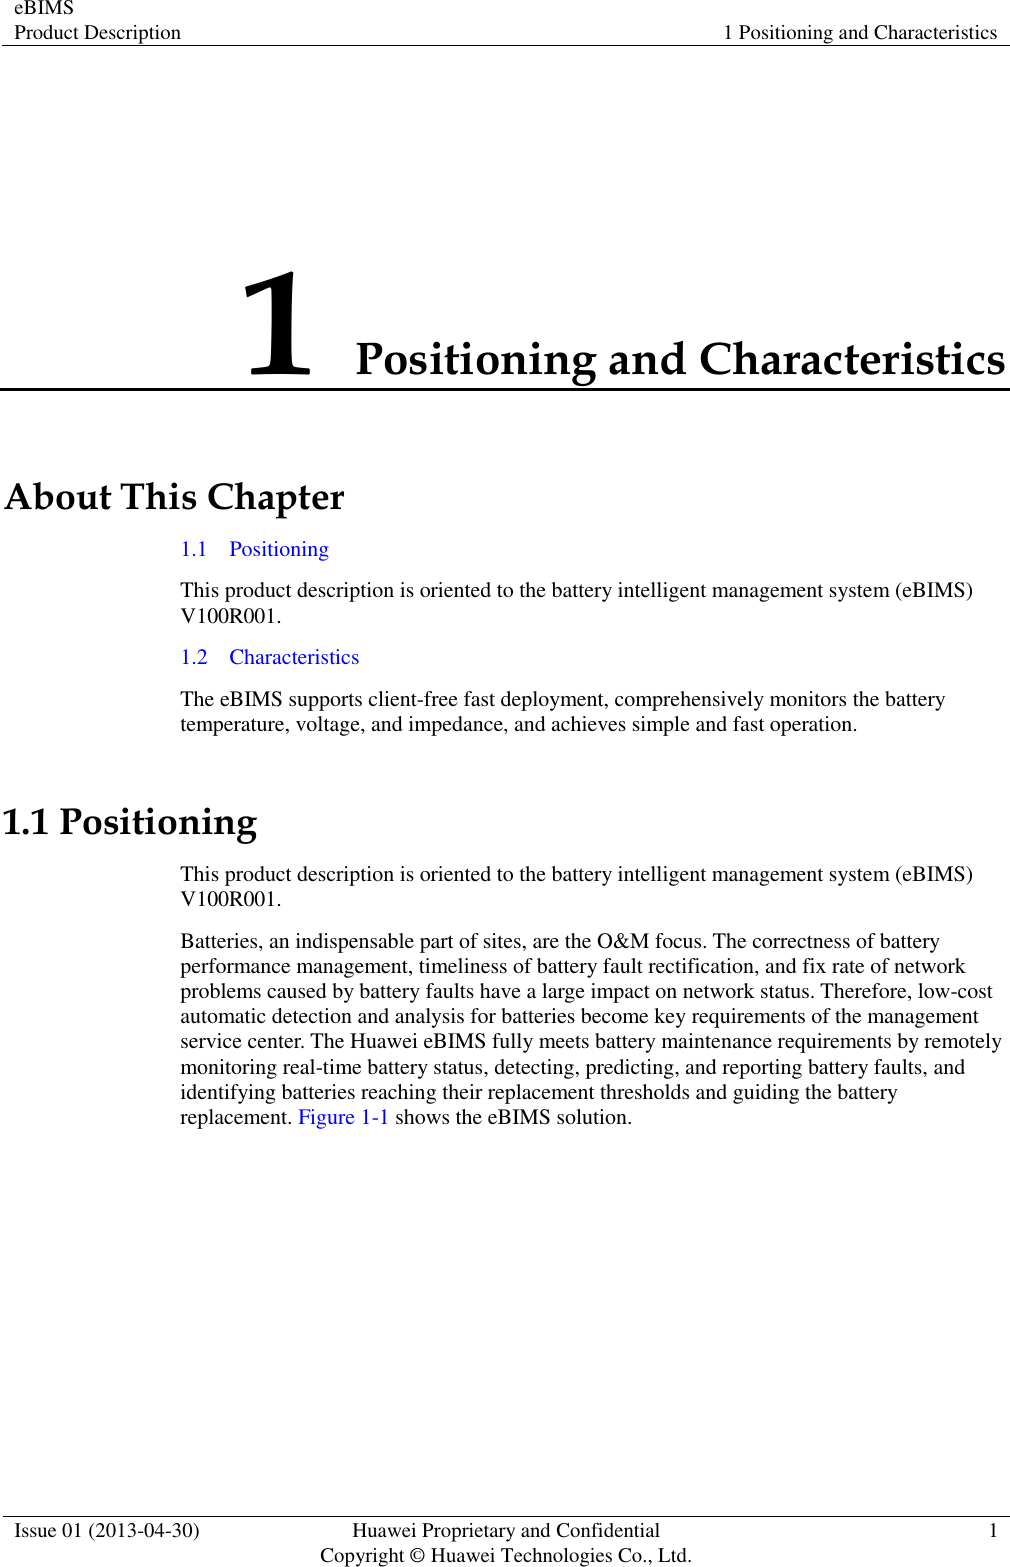 eBIMS Product Description 1 Positioning and Characteristics  Issue 01 (2013-04-30) Huawei Proprietary and Confidential                                     Copyright © Huawei Technologies Co., Ltd. 1  1 Positioning and Characteristics About This Chapter 1.1    Positioning This product description is oriented to the battery intelligent management system (eBIMS) V100R001. 1.2    Characteristics The eBIMS supports client-free fast deployment, comprehensively monitors the battery temperature, voltage, and impedance, and achieves simple and fast operation. 1.1 Positioning This product description is oriented to the battery intelligent management system (eBIMS) V100R001. Batteries, an indispensable part of sites, are the O&amp;M focus. The correctness of battery performance management, timeliness of battery fault rectification, and fix rate of network problems caused by battery faults have a large impact on network status. Therefore, low-cost automatic detection and analysis for batteries become key requirements of the management service center. The Huawei eBIMS fully meets battery maintenance requirements by remotely monitoring real-time battery status, detecting, predicting, and reporting battery faults, and identifying batteries reaching their replacement thresholds and guiding the battery replacement. Figure 1-1 shows the eBIMS solution. 